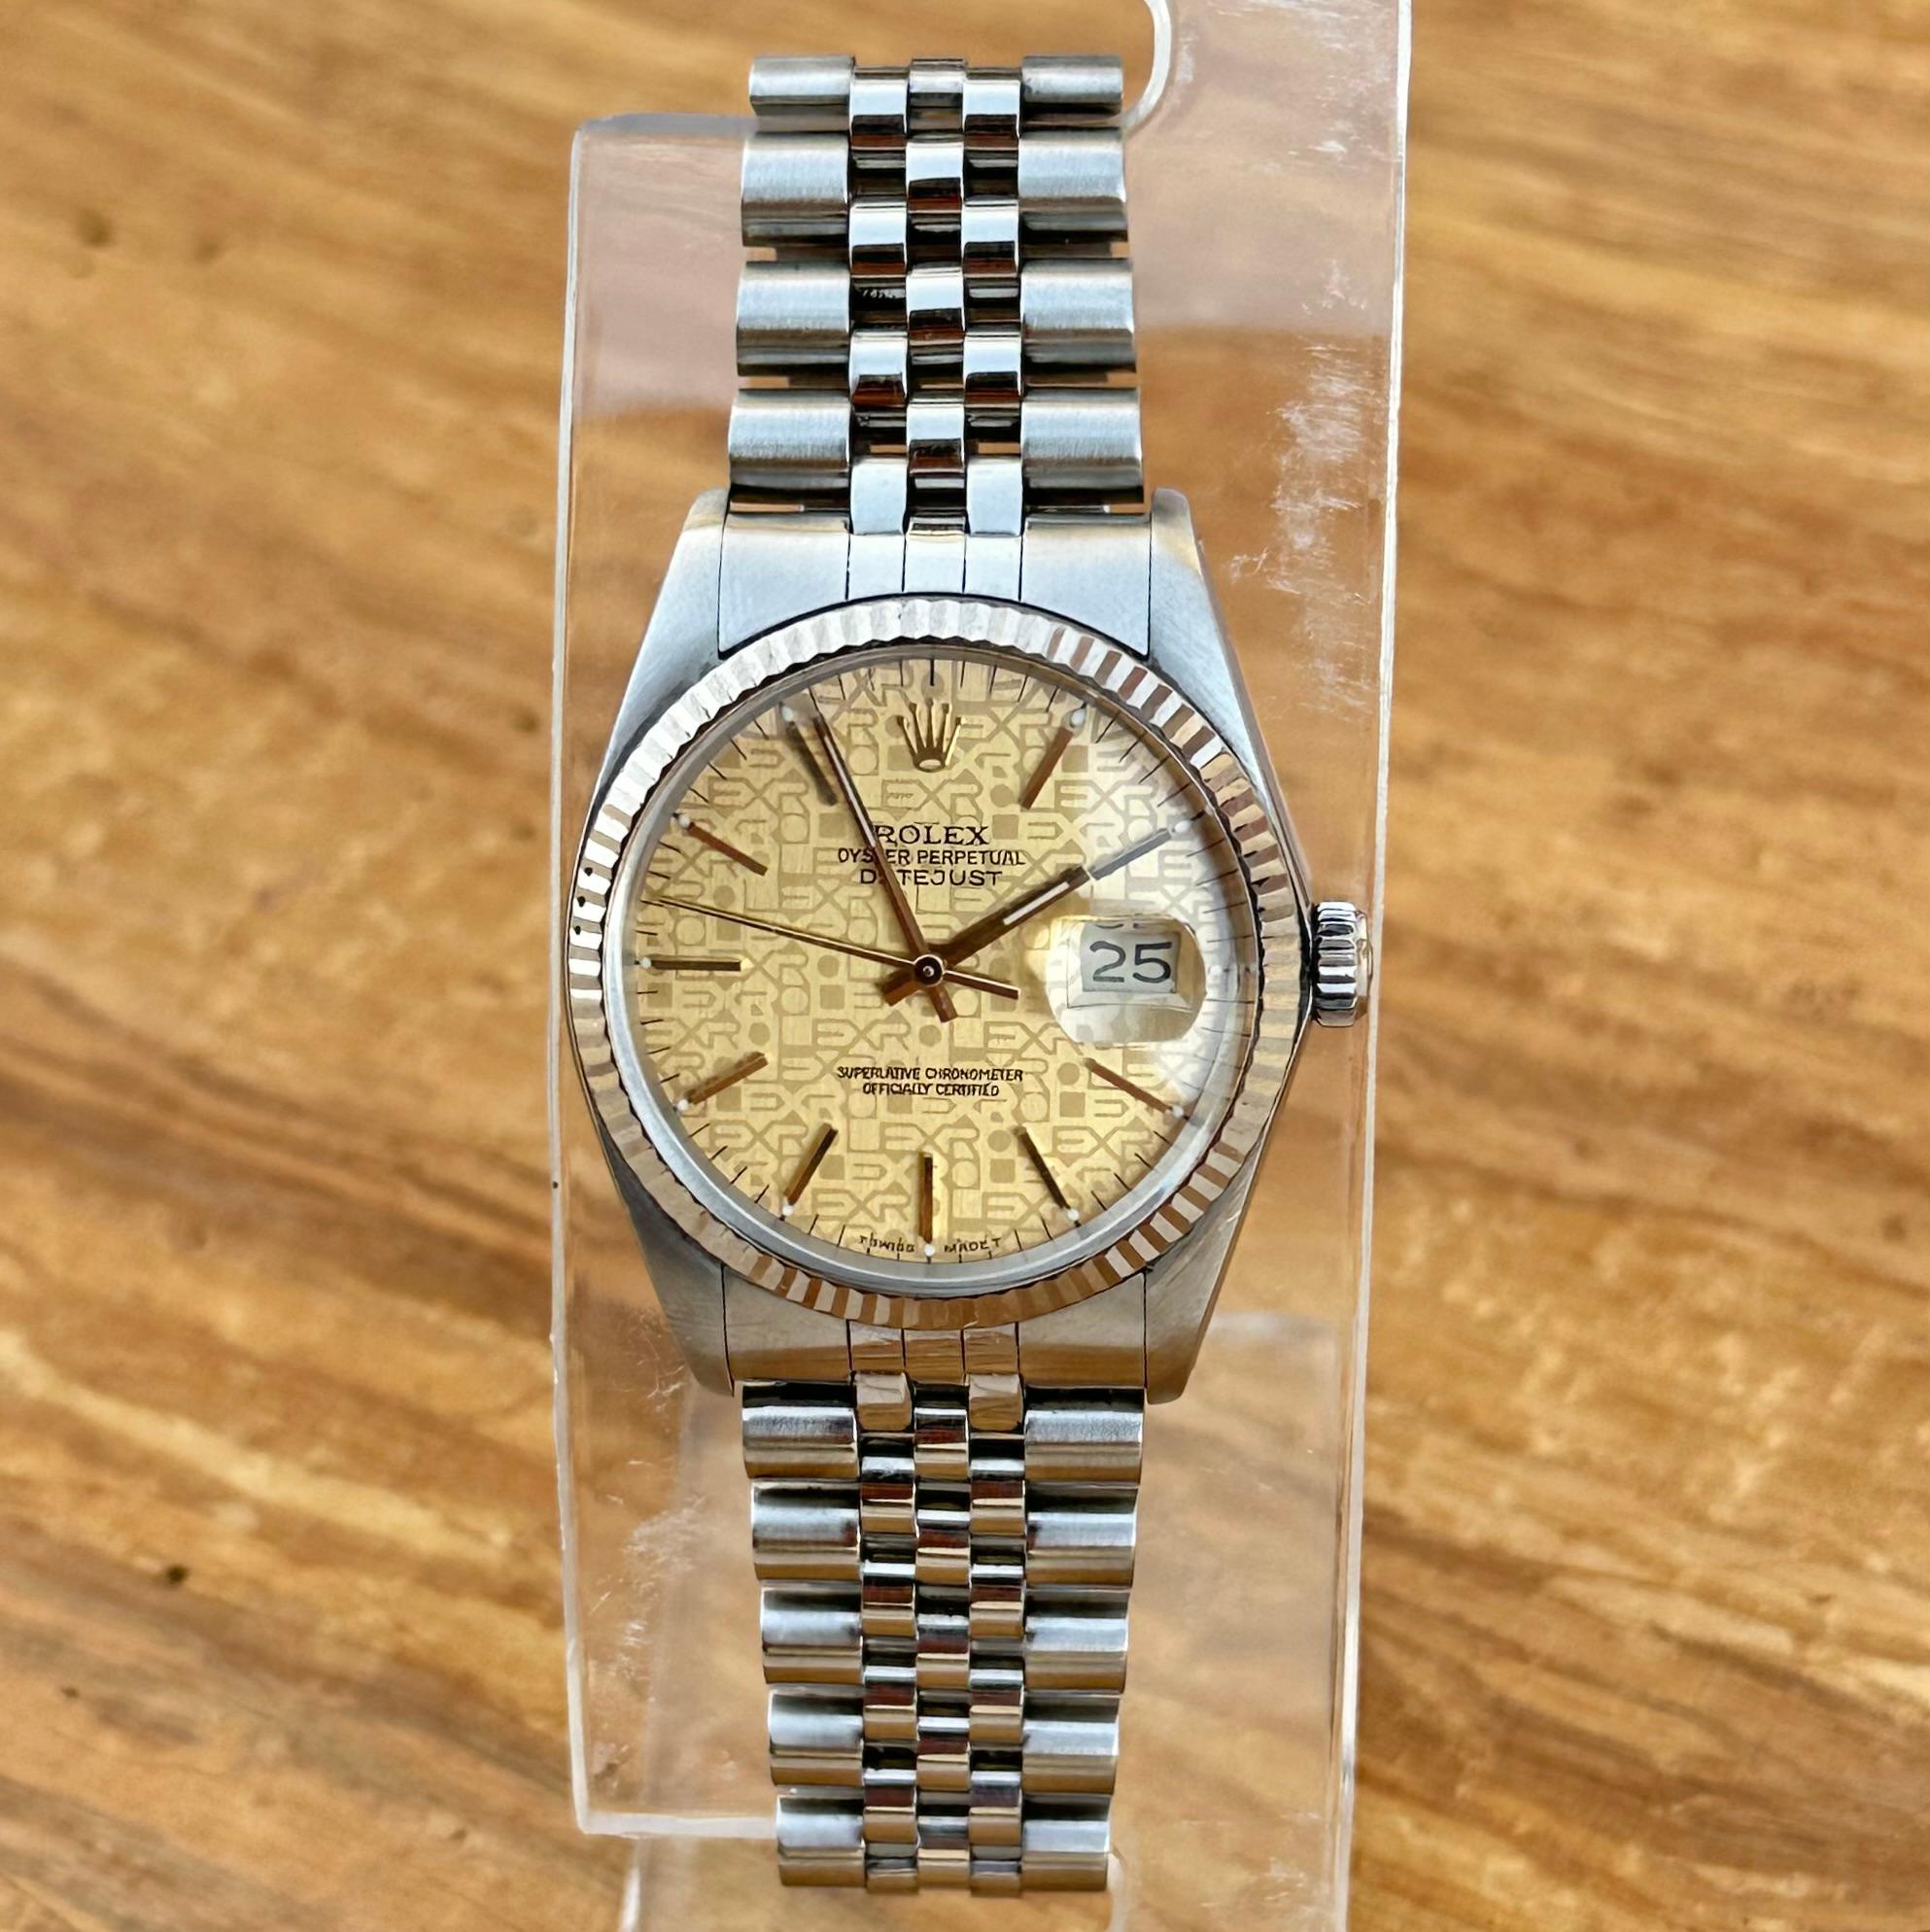 Rolex Datejust 36 36mm Ref 16014 Rare Jubilee dial anniversary dial Watch For Sale 7